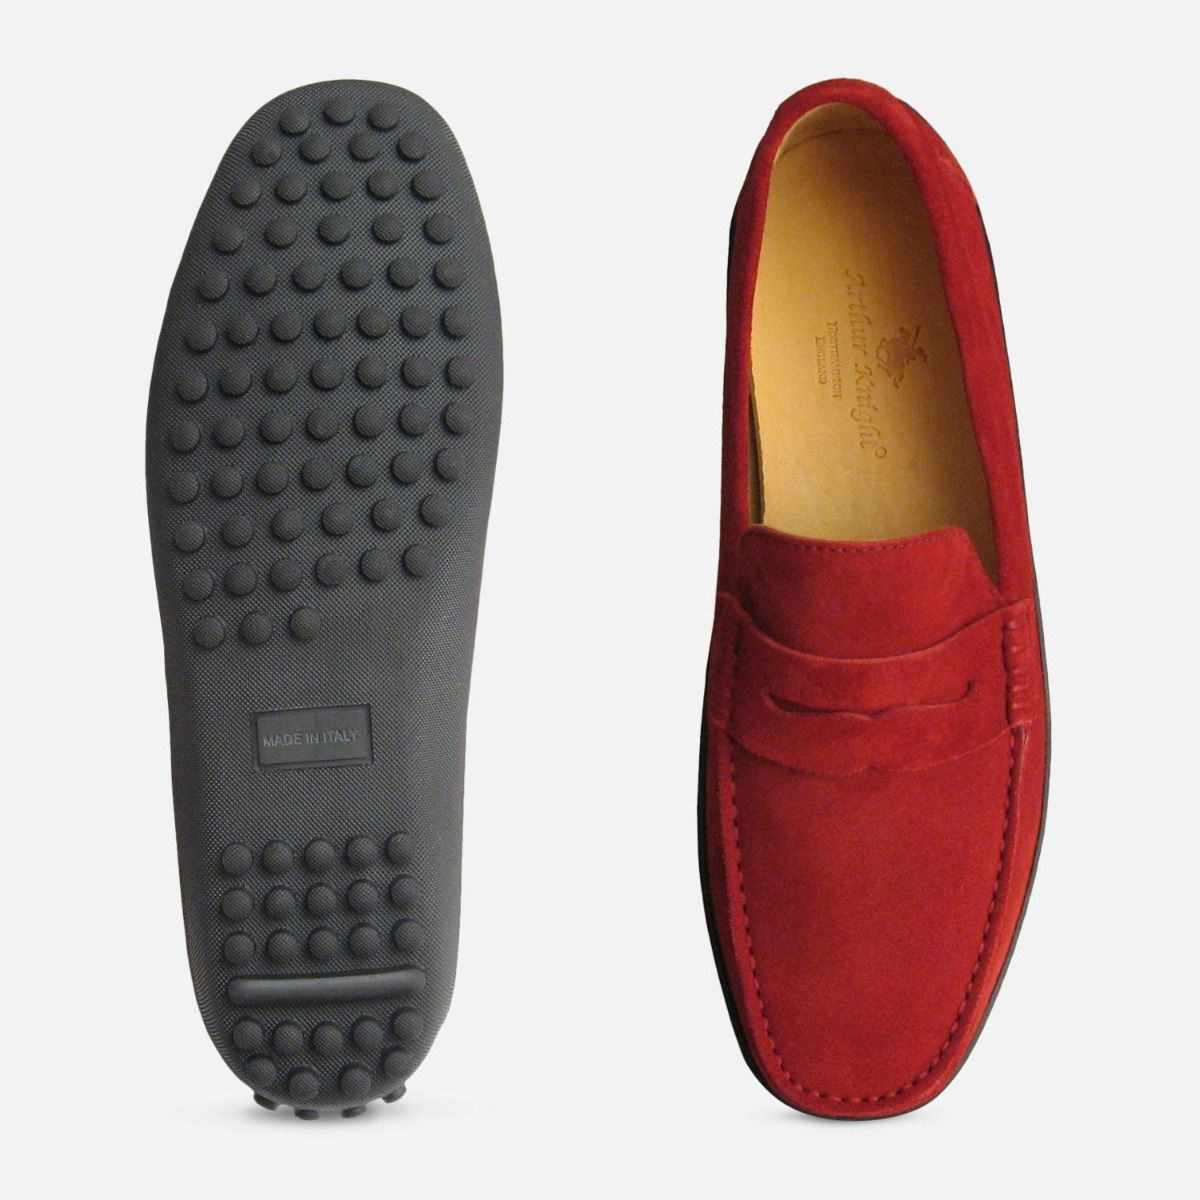 red suede driving shoes